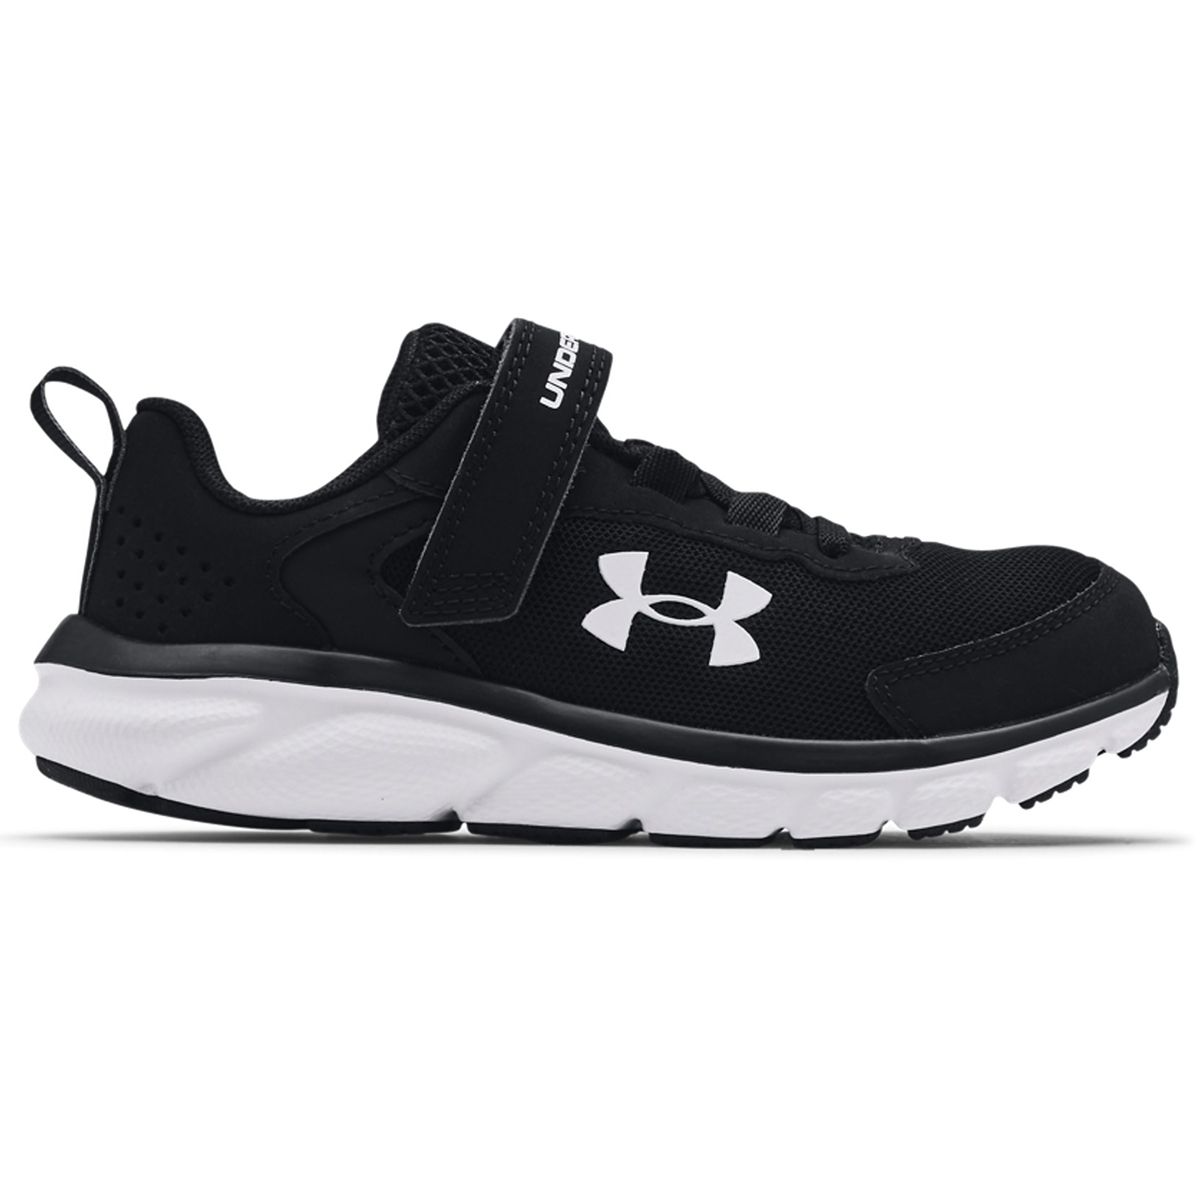 Kids' [11-3] Charged Pursuit 3 AC Running Shoe, Under Armour